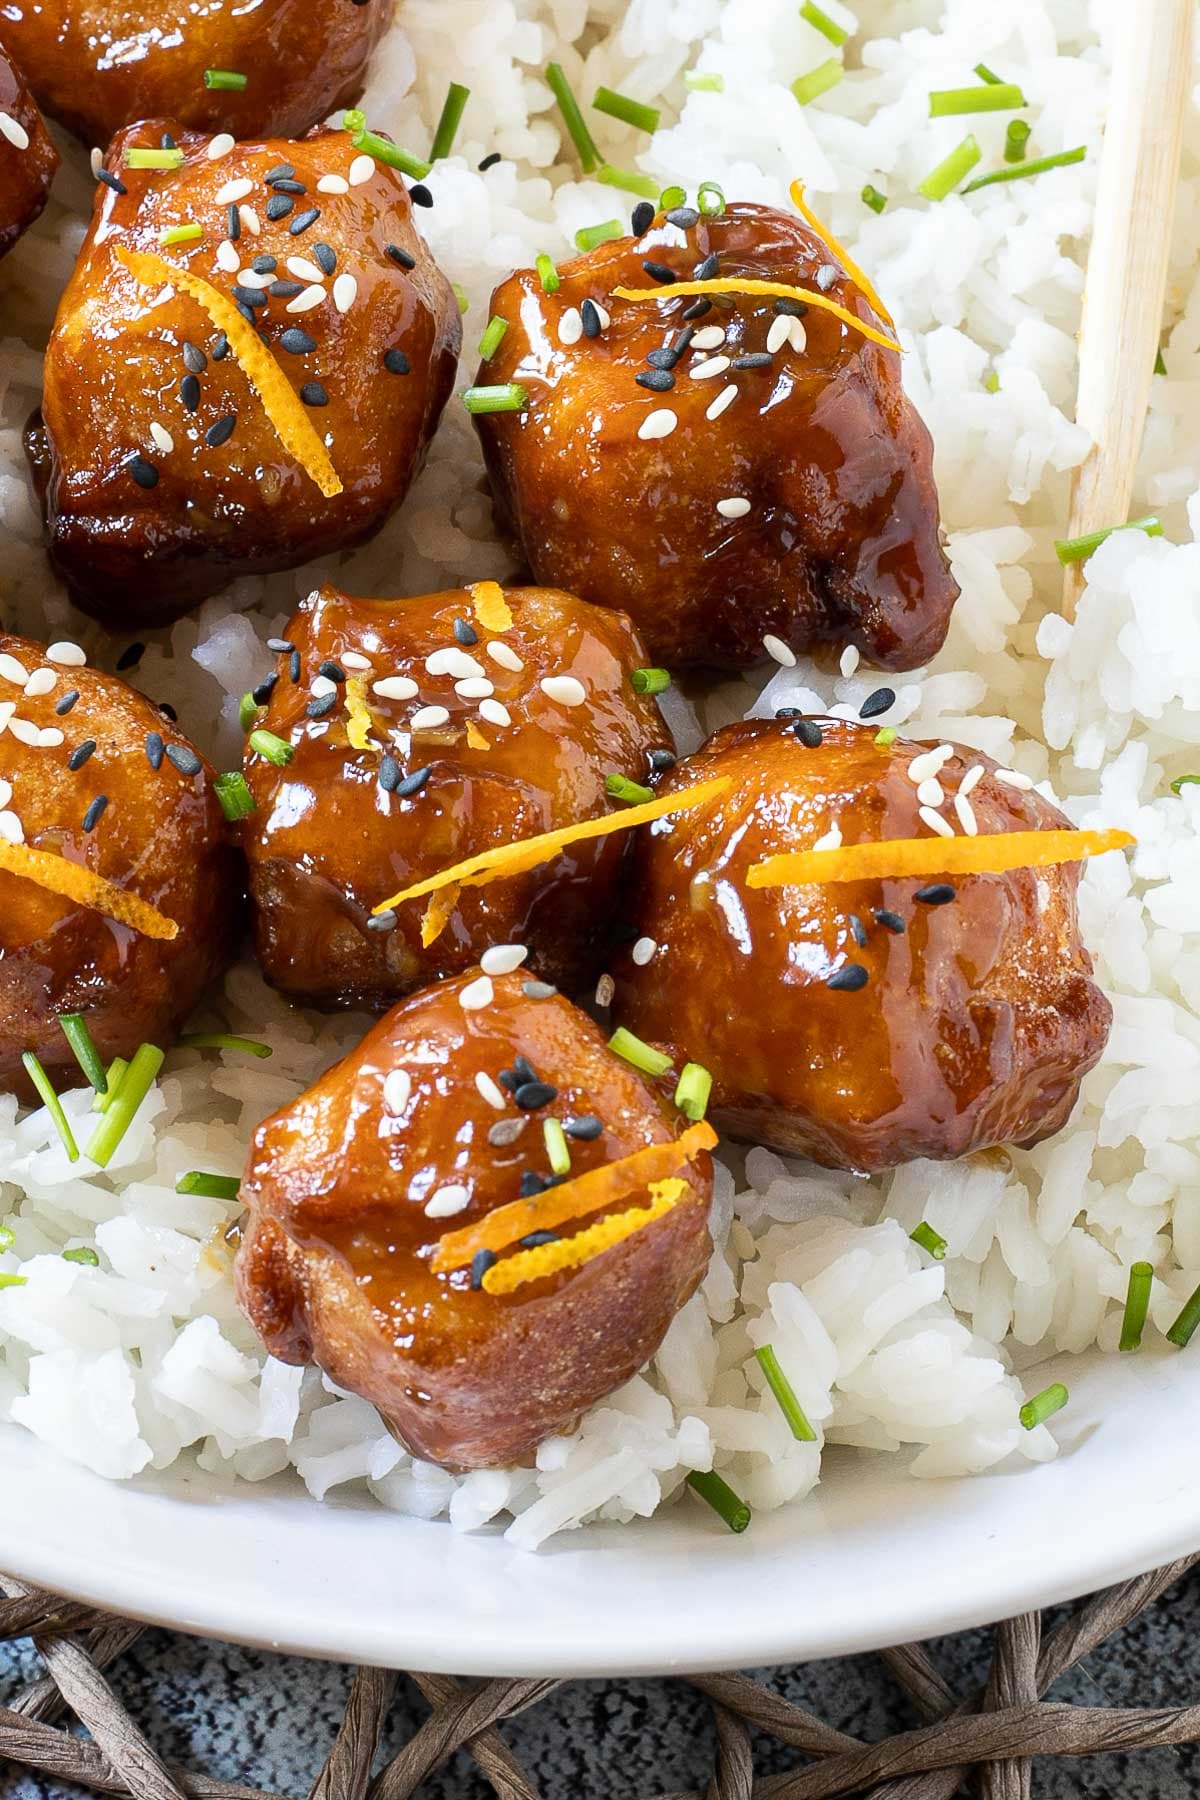 Sticky brown breaded tofu cubes are served on top of rice in a white bowl. It is sprinkled with chopped chives and sesame seeds.